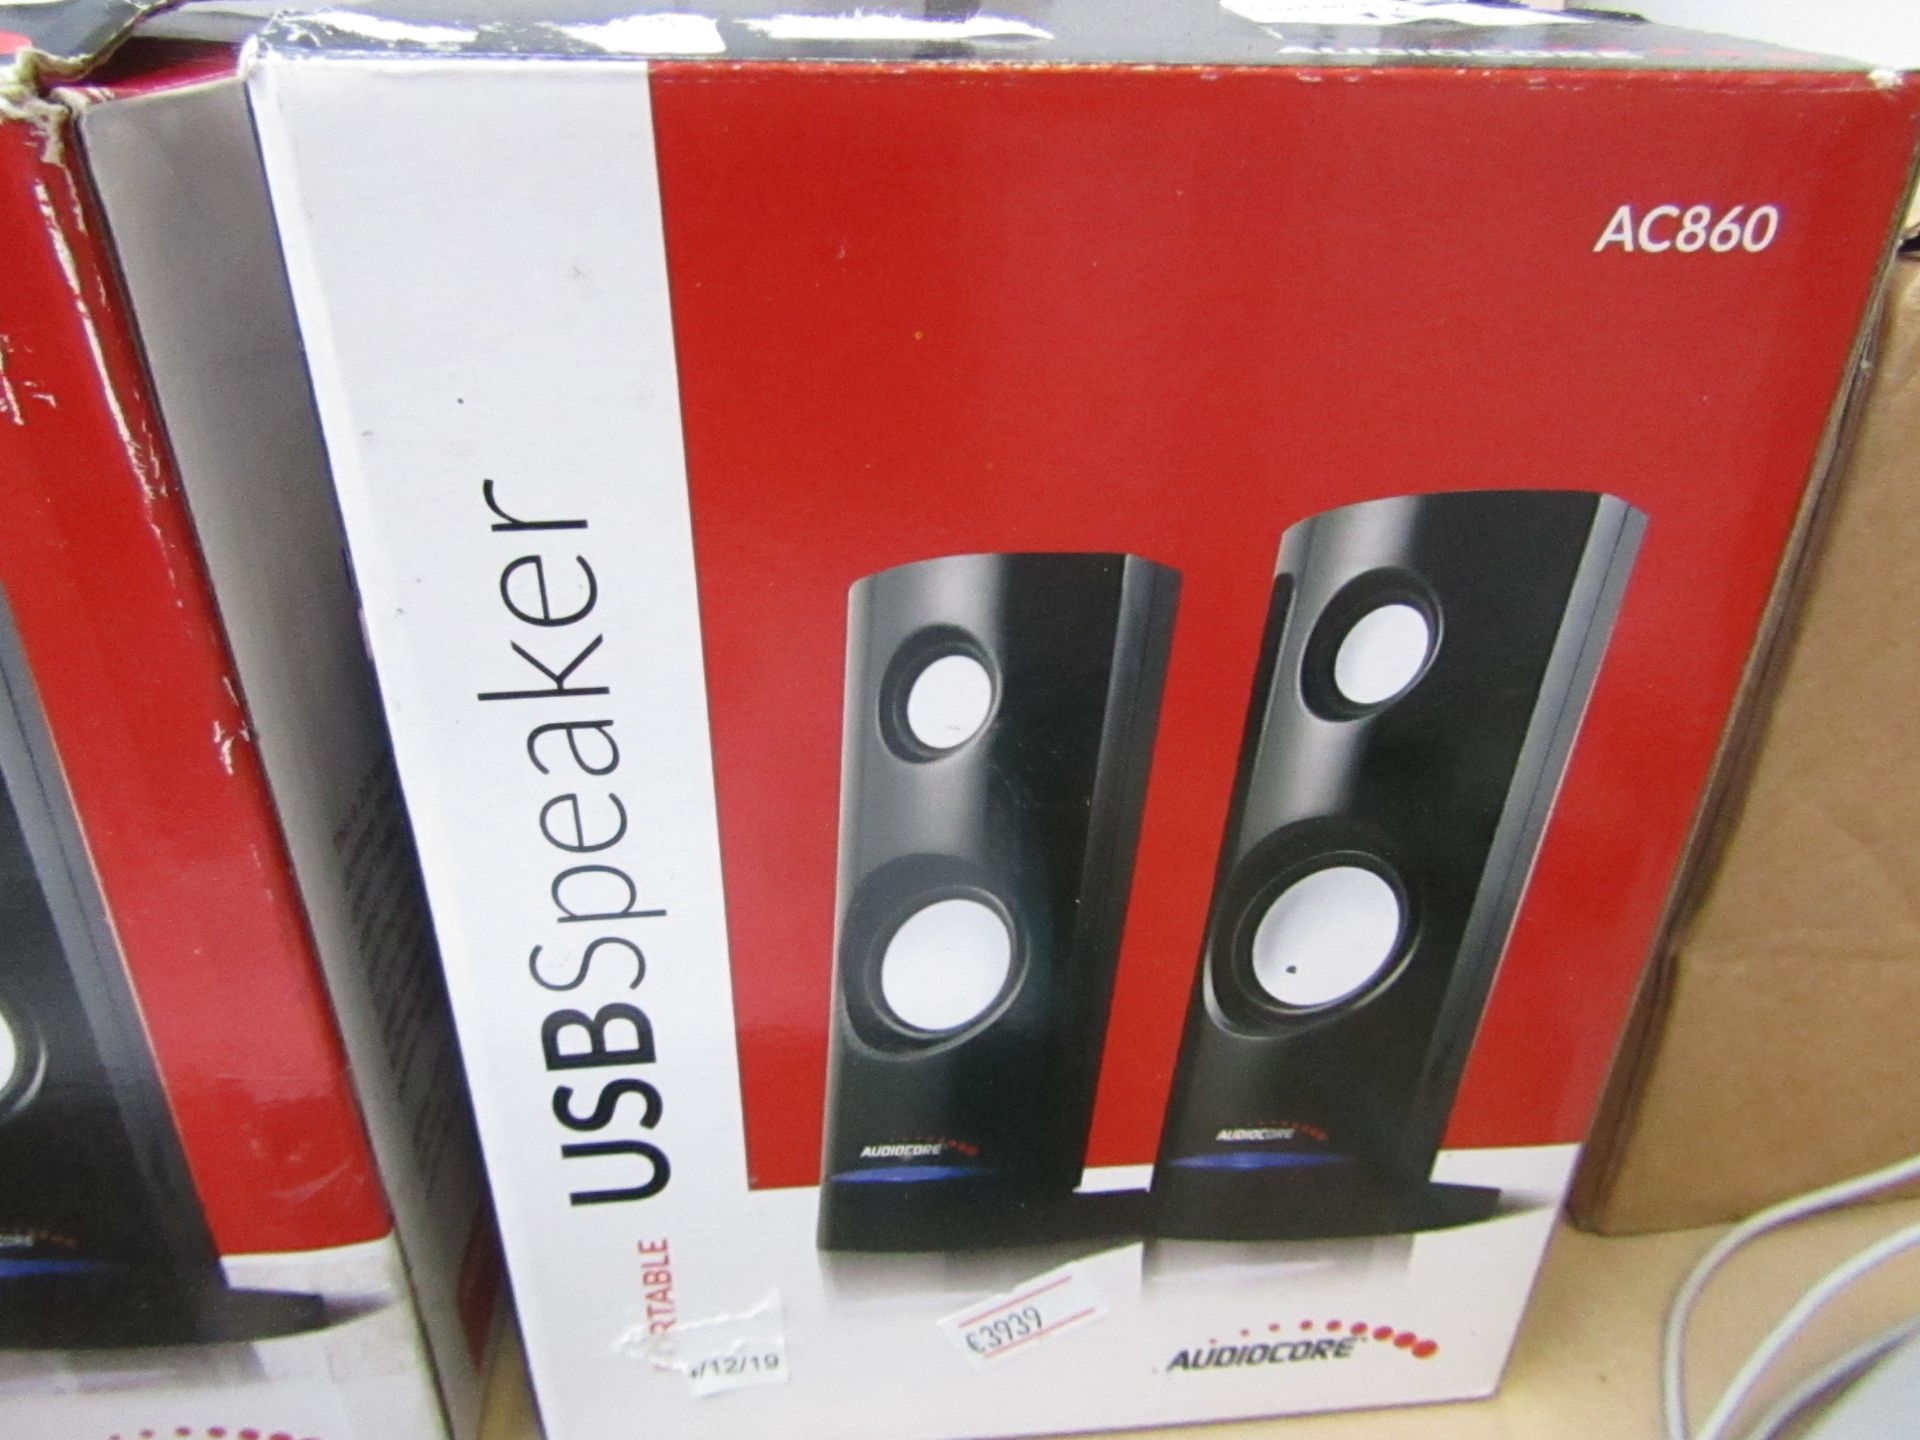 Audiocore - Portable USB Speakers - Unchecked and boxed.